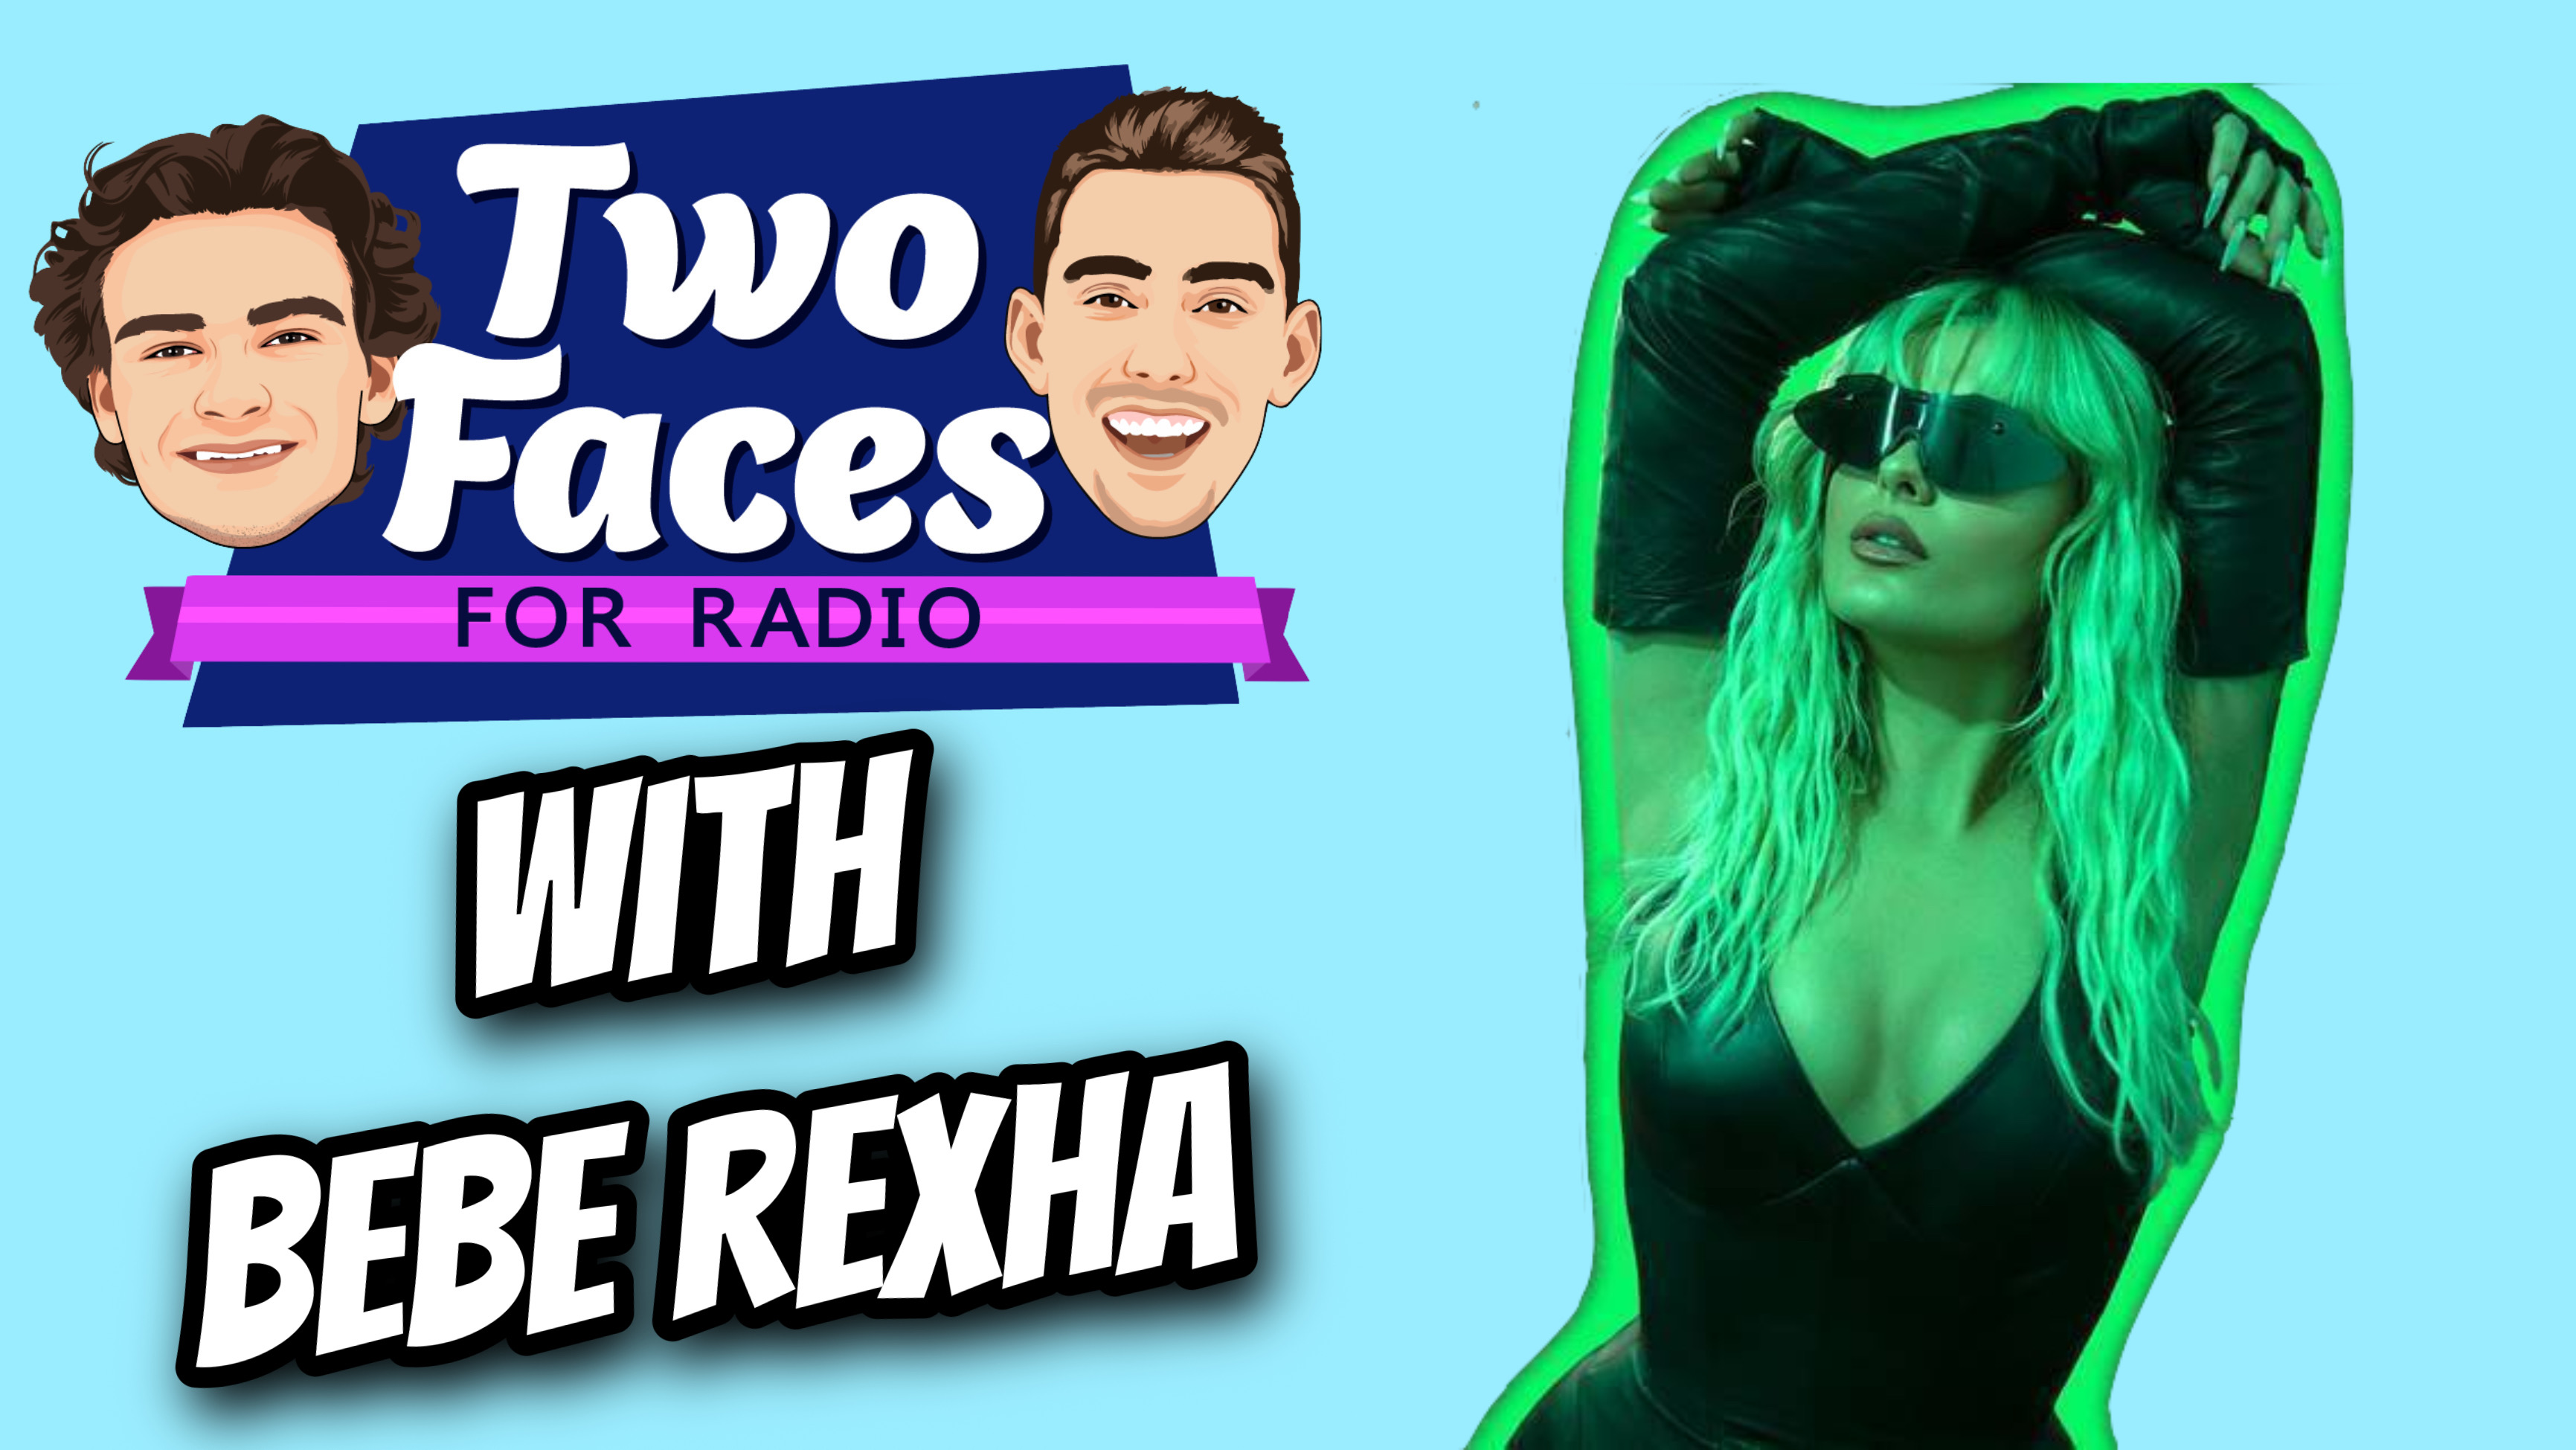 Bebe Rexha Joins Two Faces For Radio [WATCH]